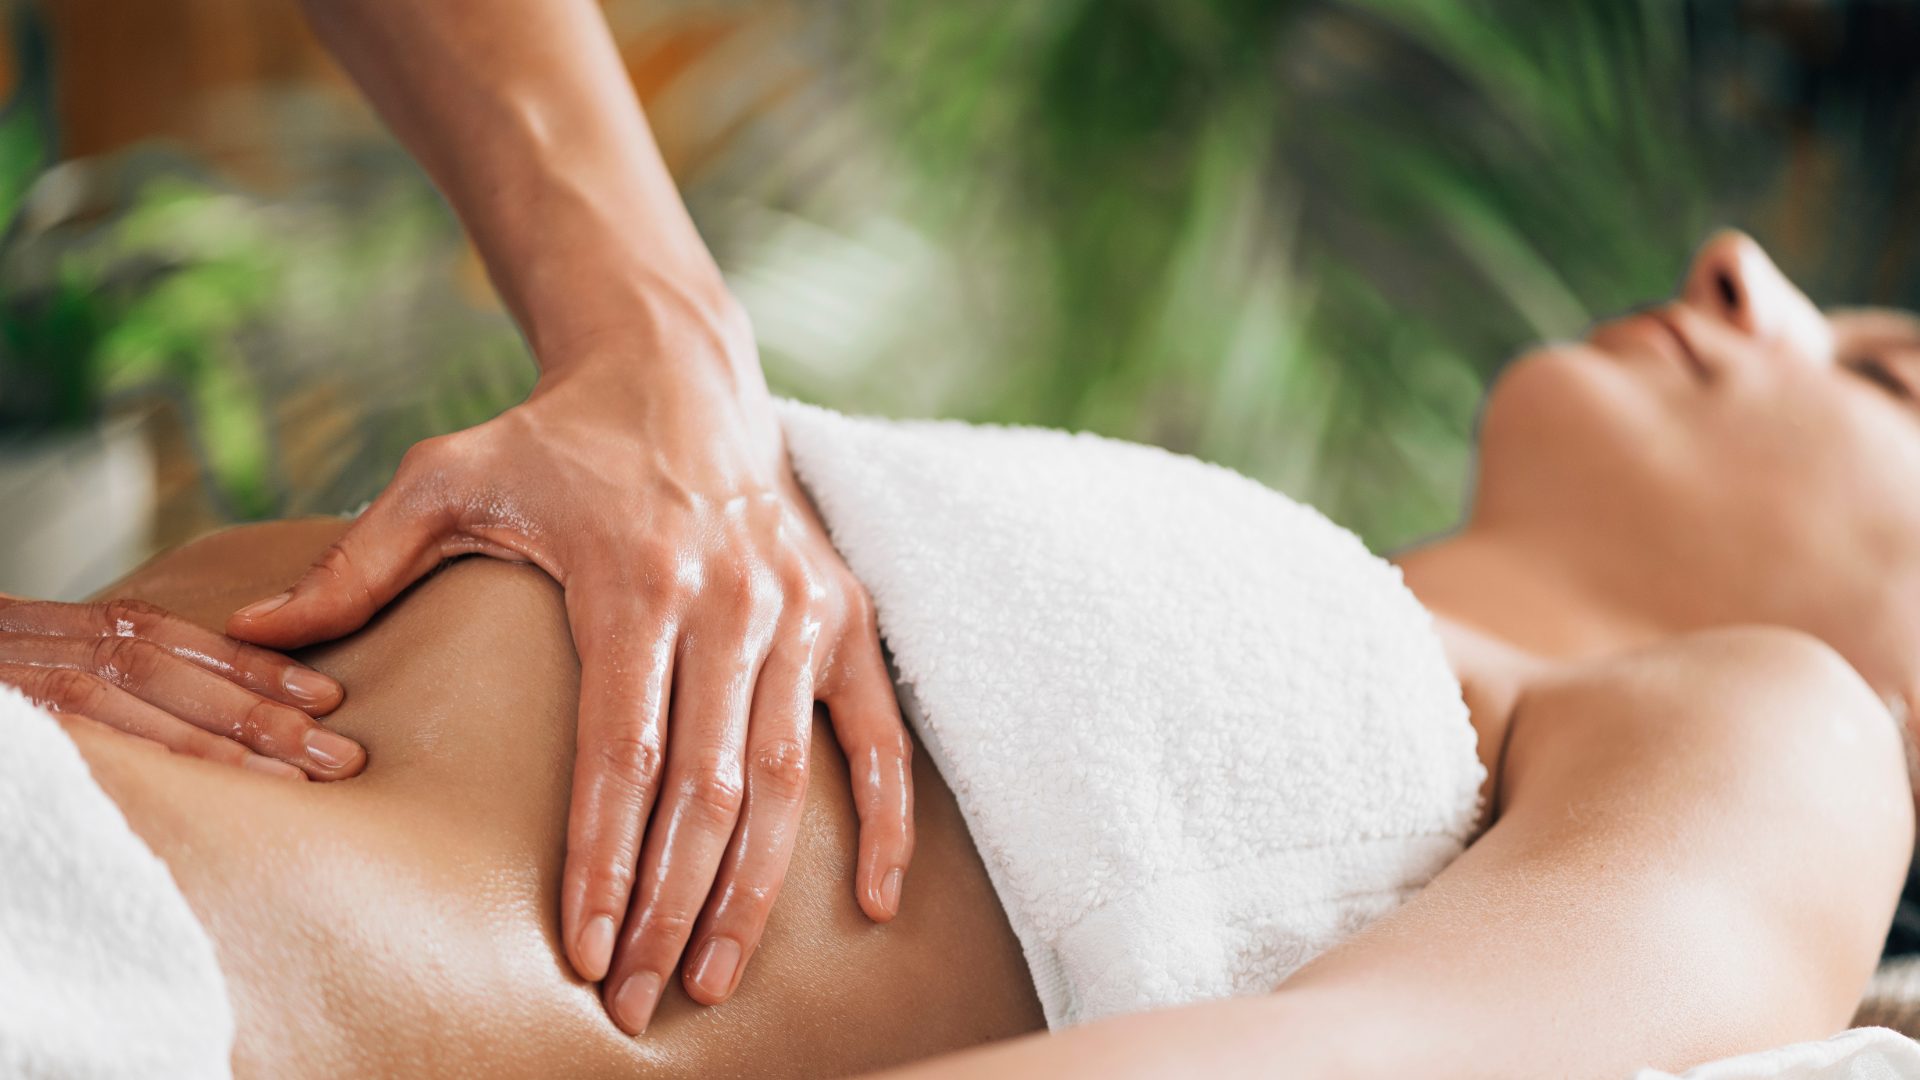 Relaxing the Abdomen: The Benefits of Massage Therapy for IBS